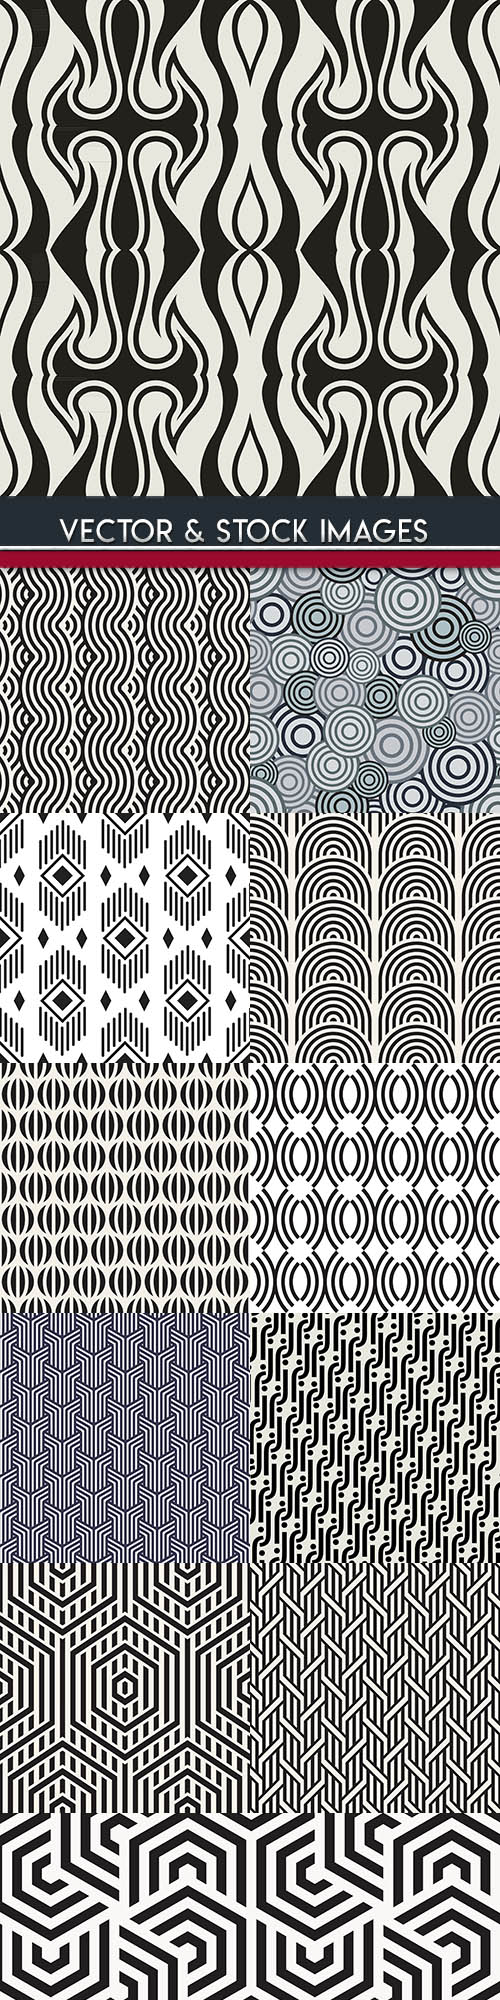 Abstract geometry seamless pattern design 35 